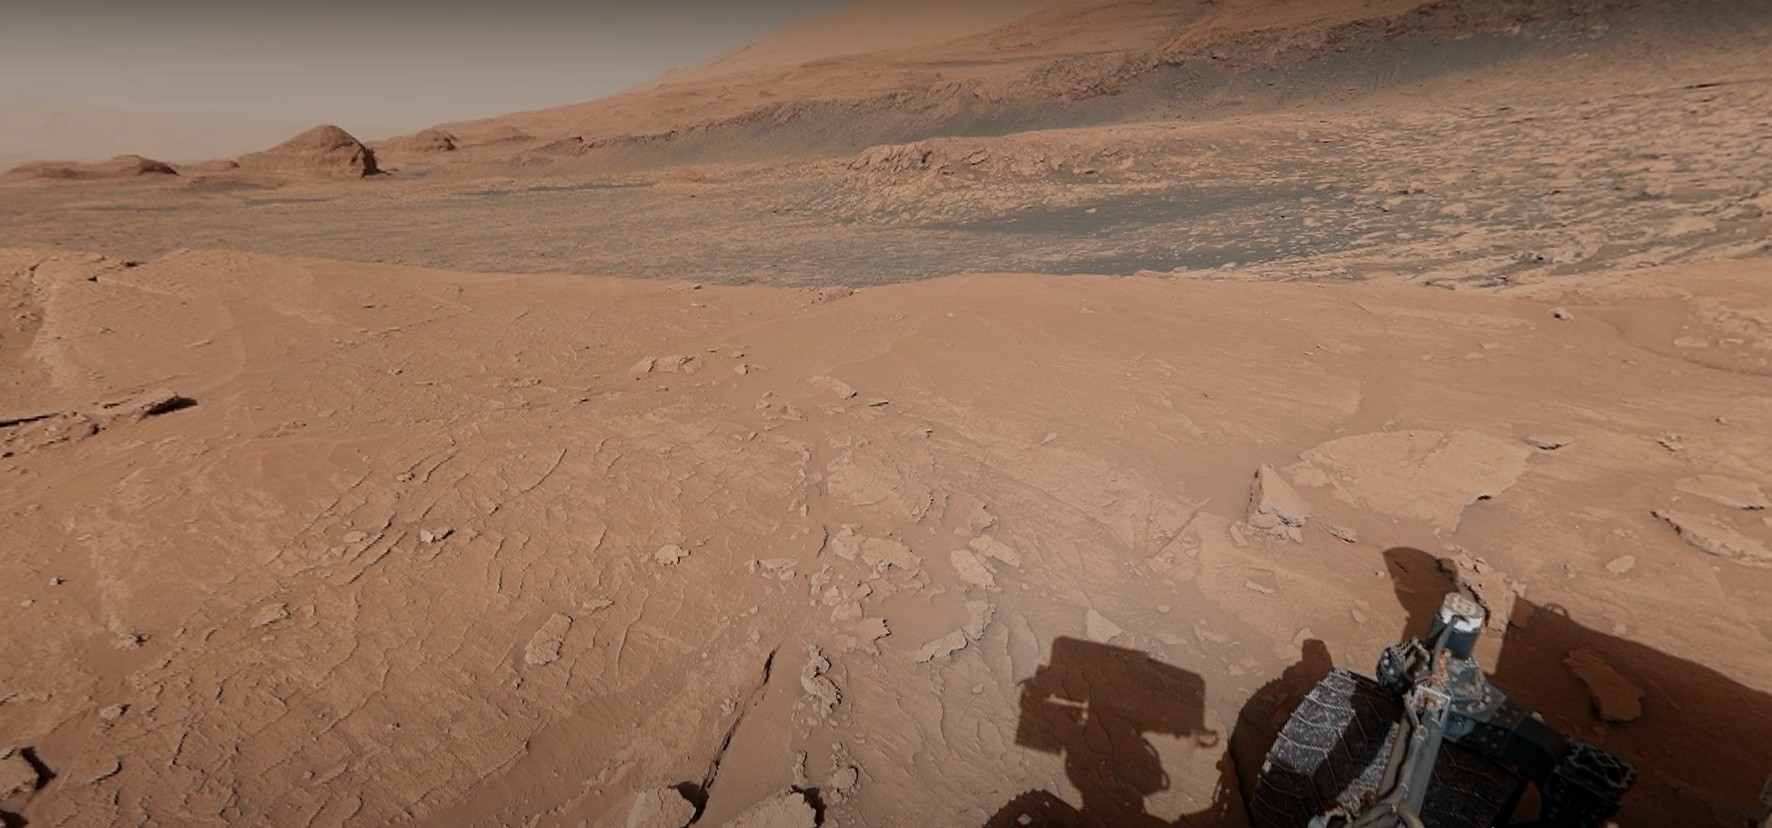 area of mars visited by curiosity shows steep cliffs and blue water its a camera trick 6